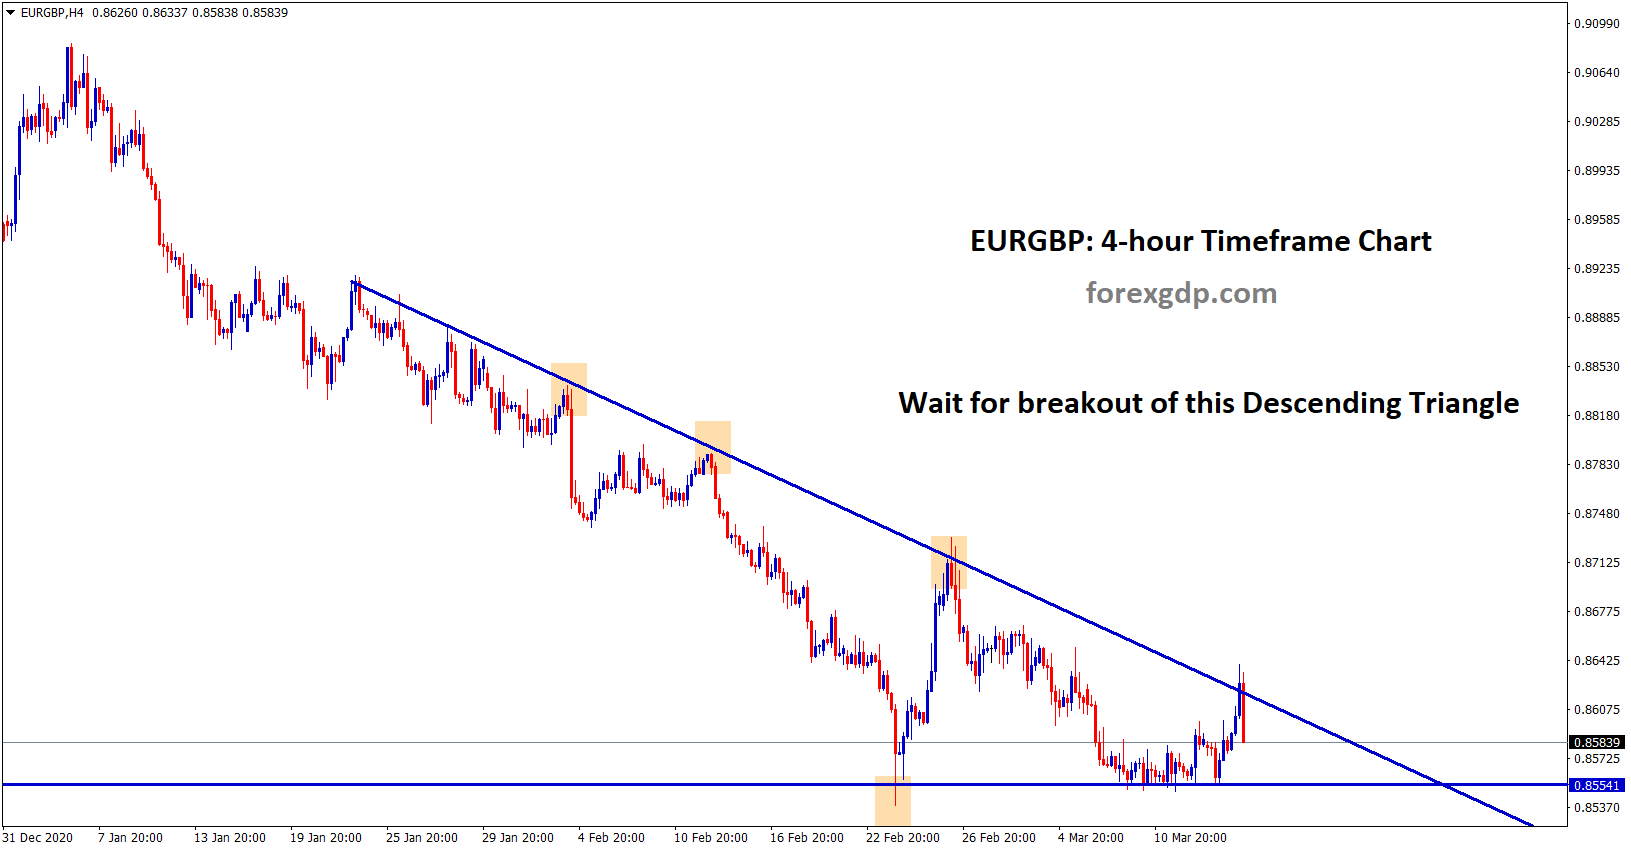 EURGBP wait for breakout of the descending triangle chart